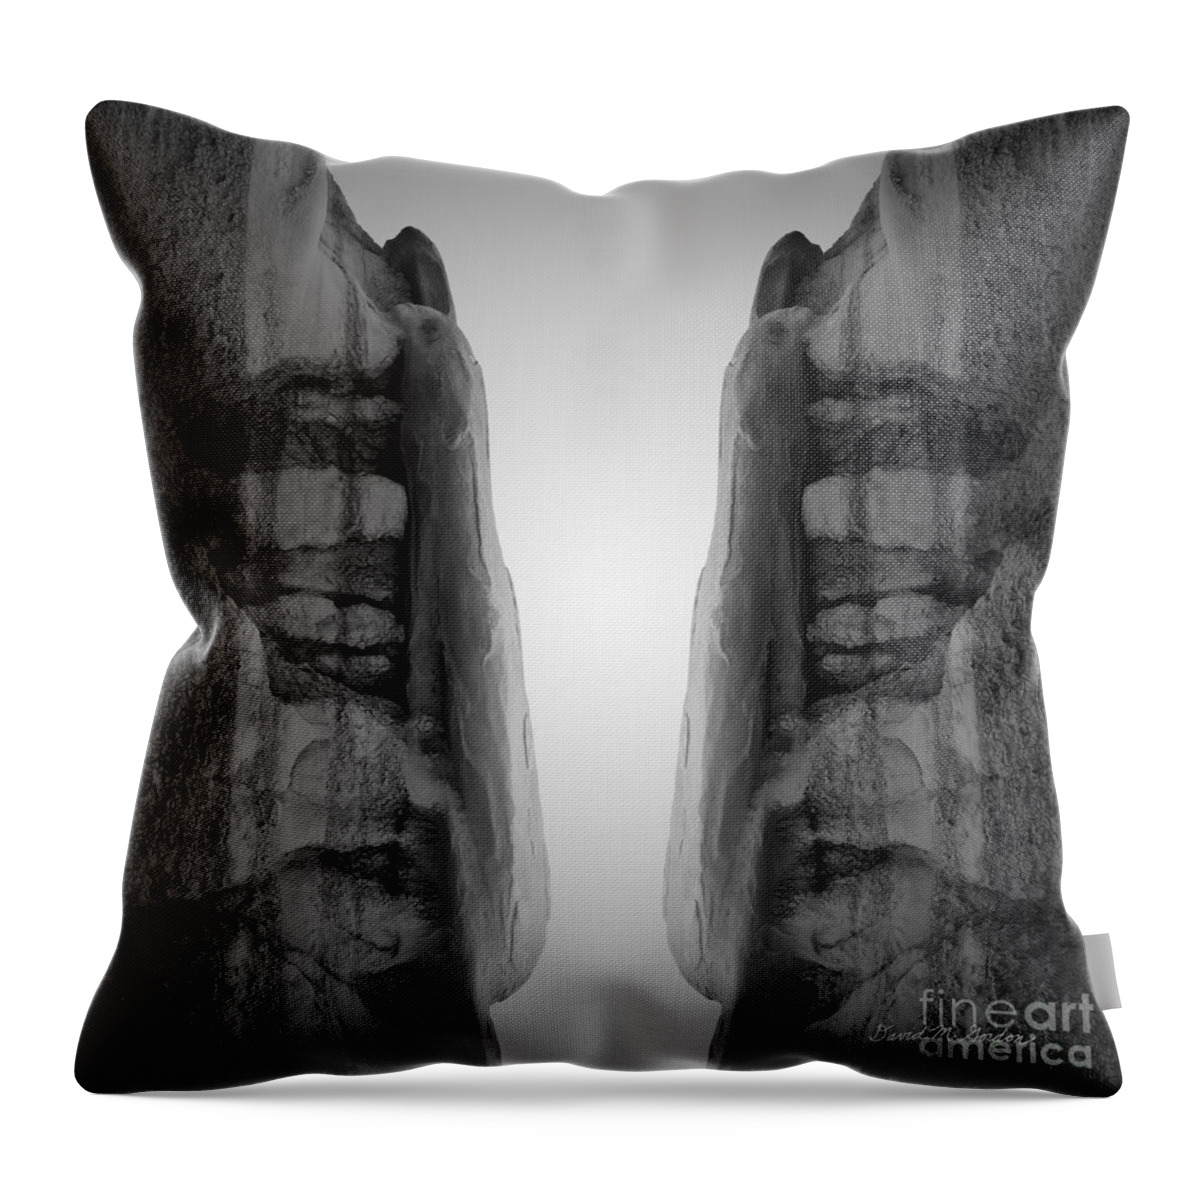 Black Throw Pillow featuring the photograph Face To Face Montage I by David Gordon